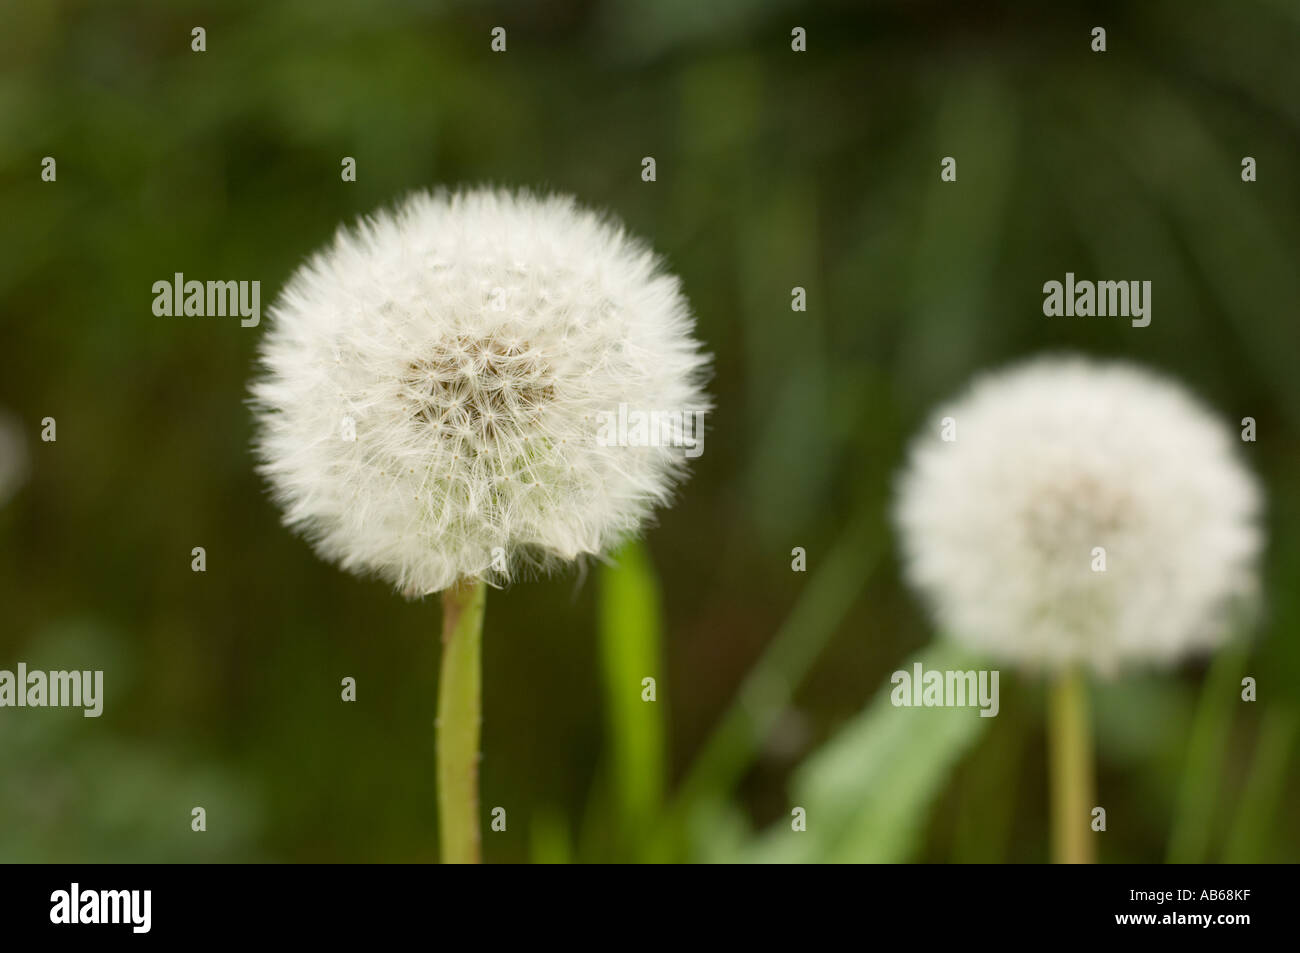 Two seed heads of the dandelion plant [ taraxacum officinal] Stock Photo